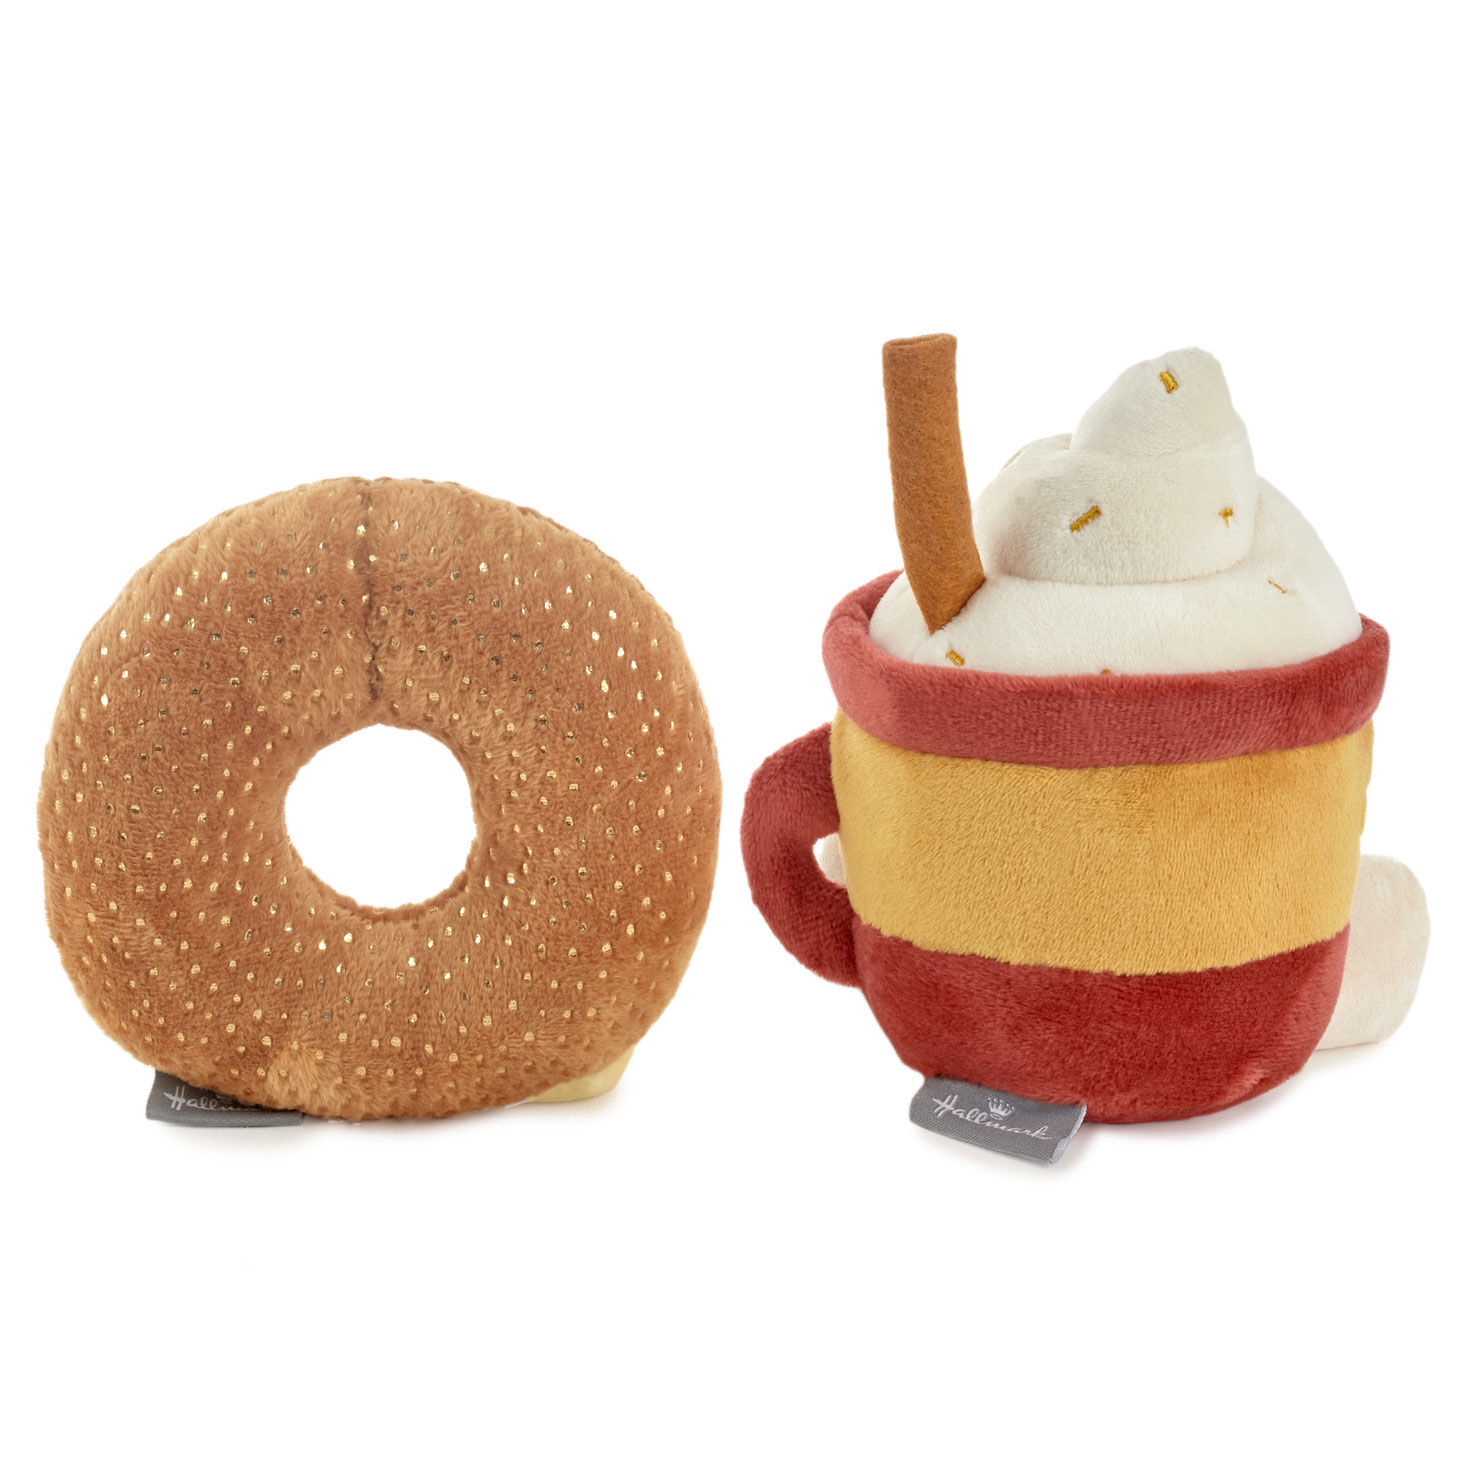 Better Together Doughnut and Latte Magnetic Plush, 7" for only USD 16.99 | Hallmark